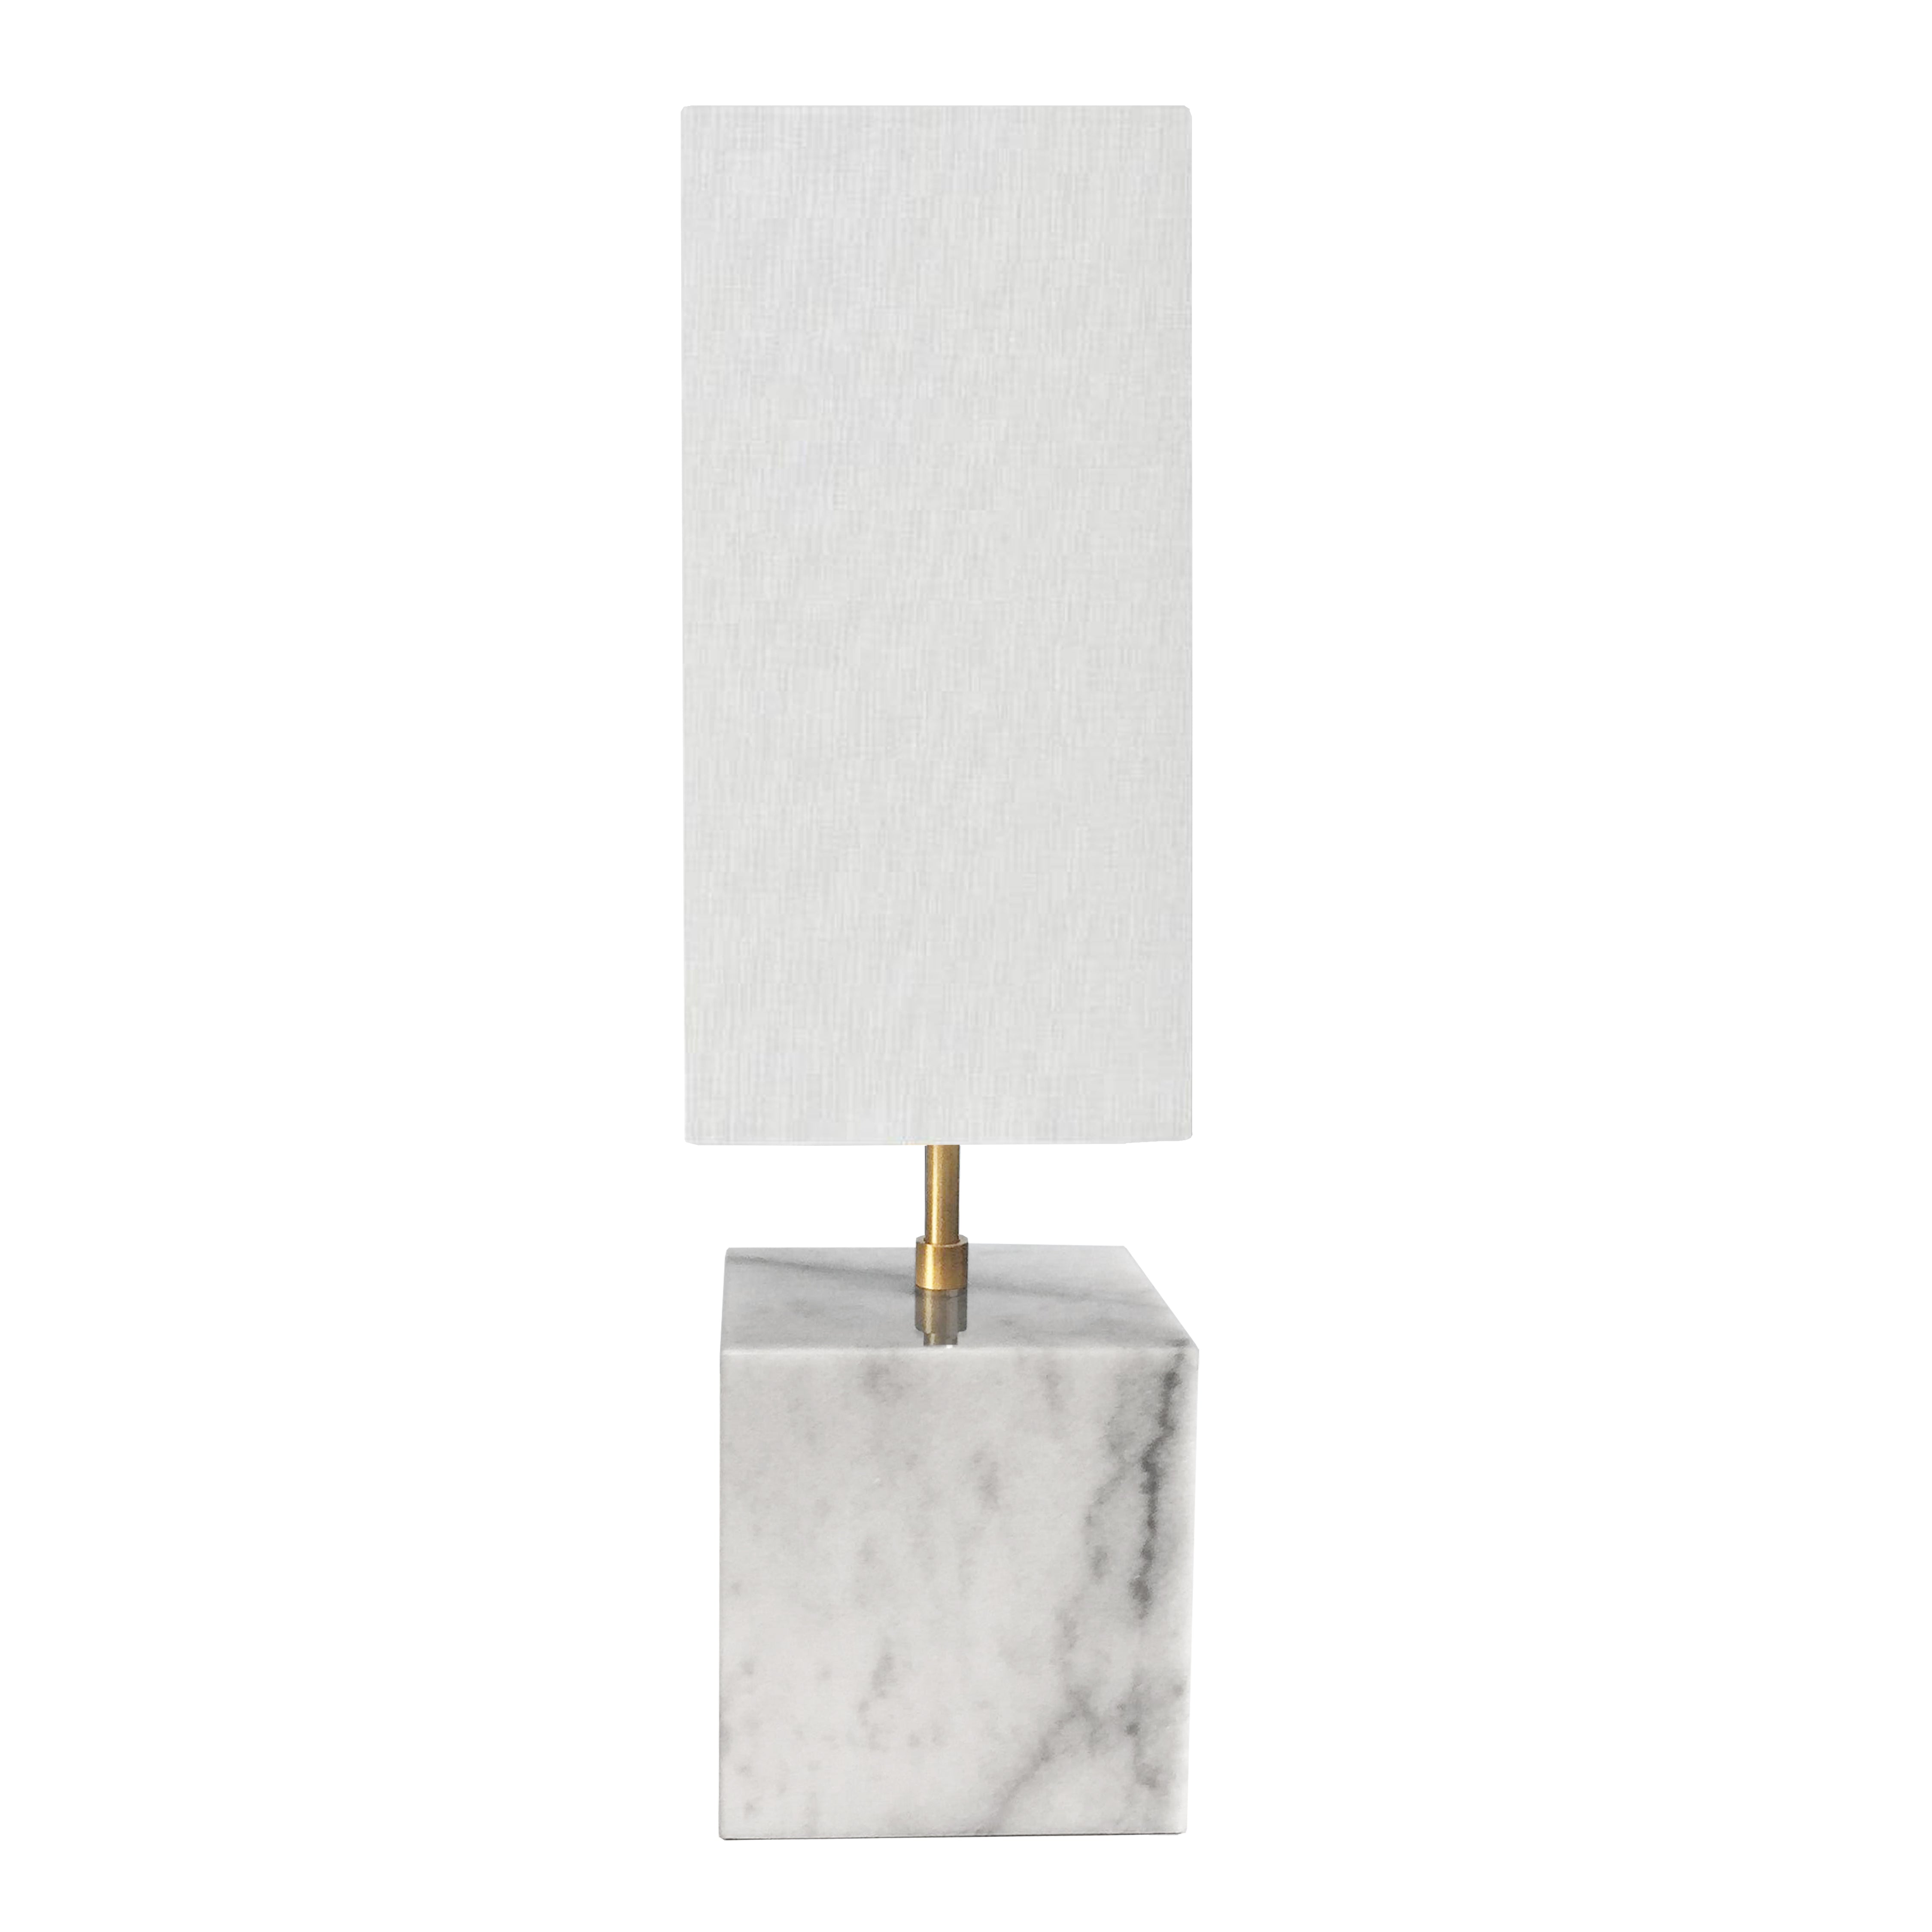 TODD Table lamp White - TOD-221T-WH-AGB | DAINOLITE